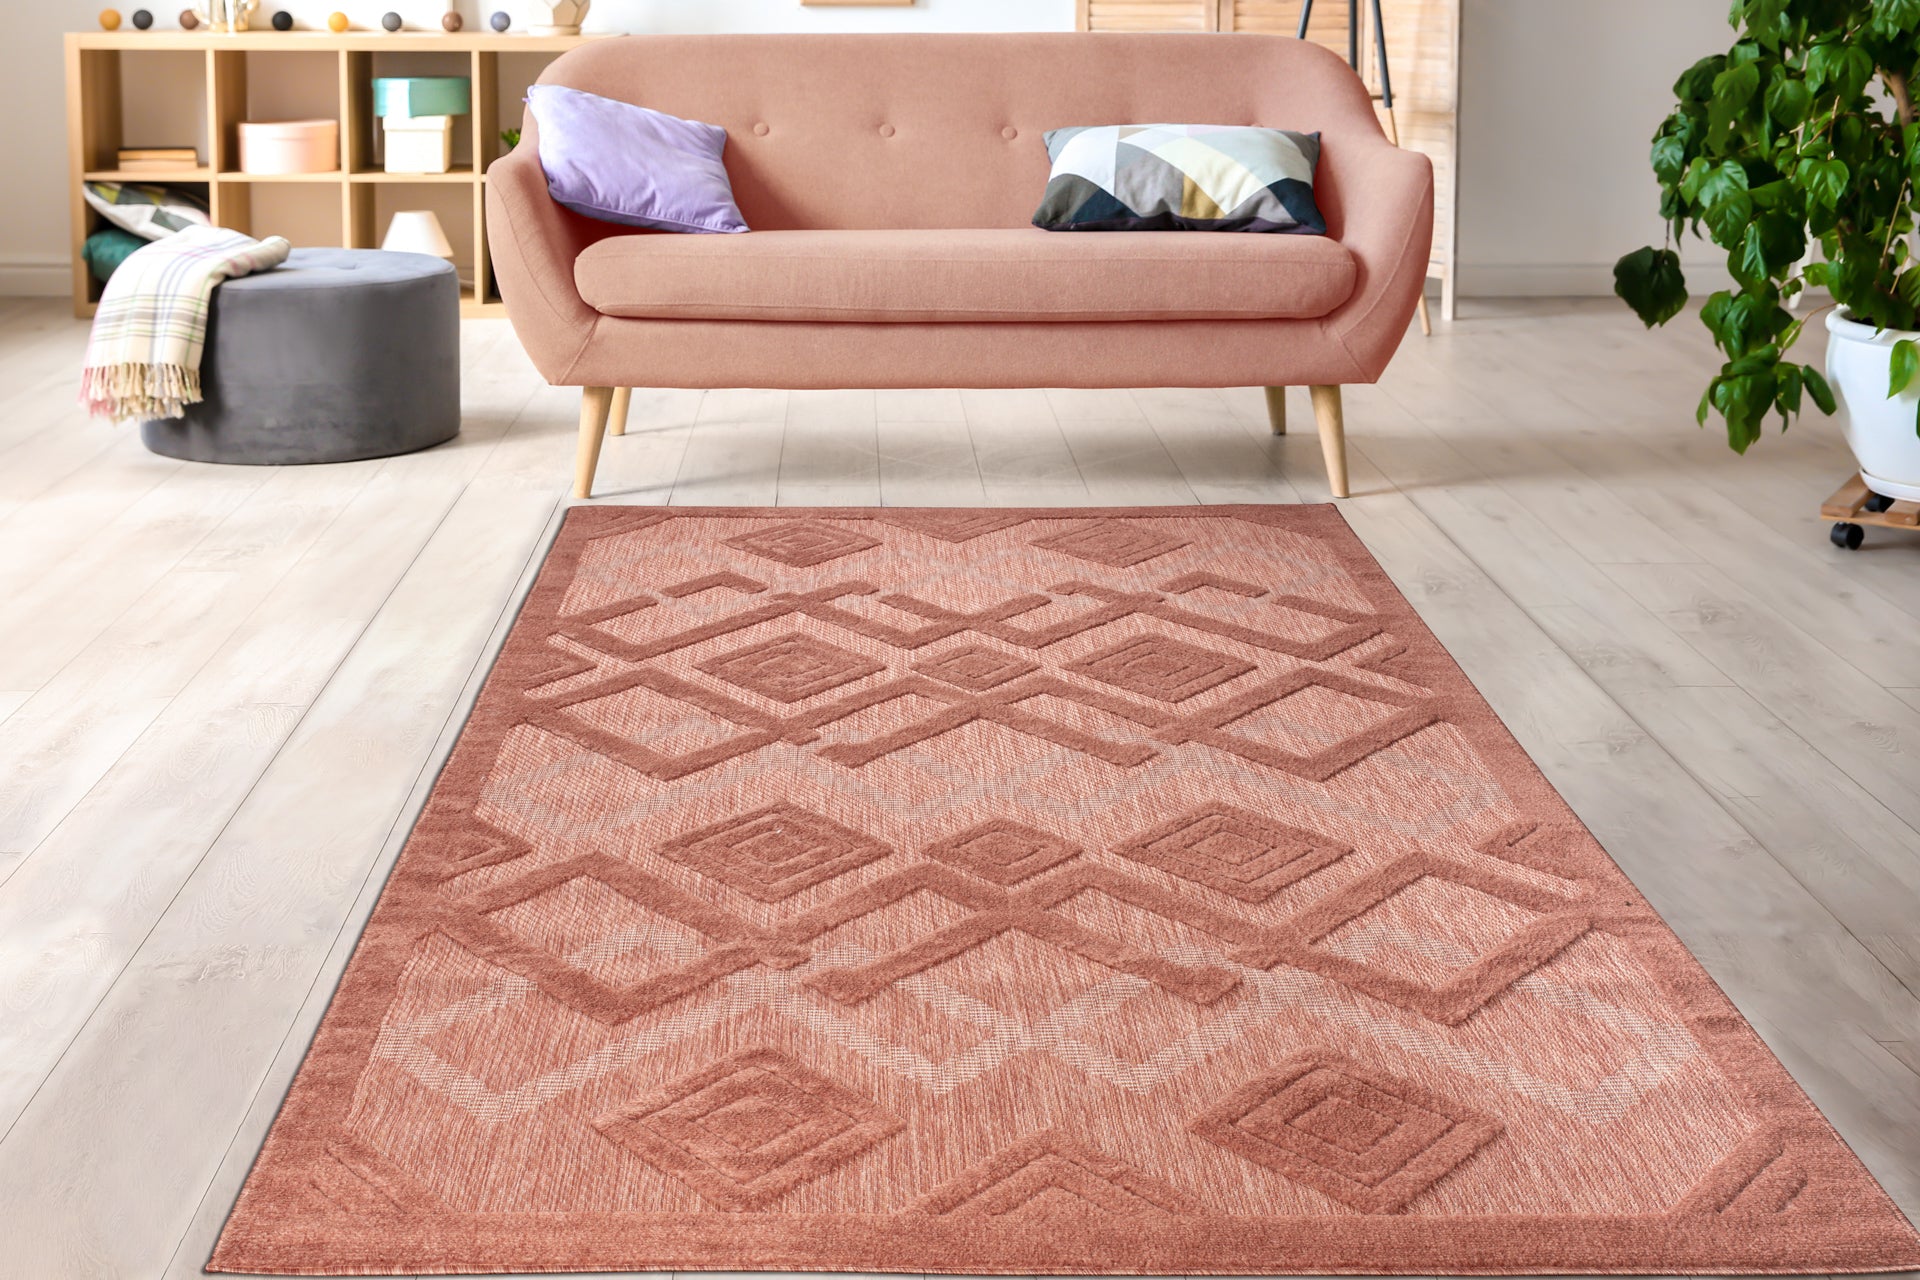 geometric modern minimalist contemporary outdoor indoor area rug carpet for patio porch dining area balcony living room bedroom 4x6, 4x5 ft Small Carpet, Home Office, Living Room, Bedroom